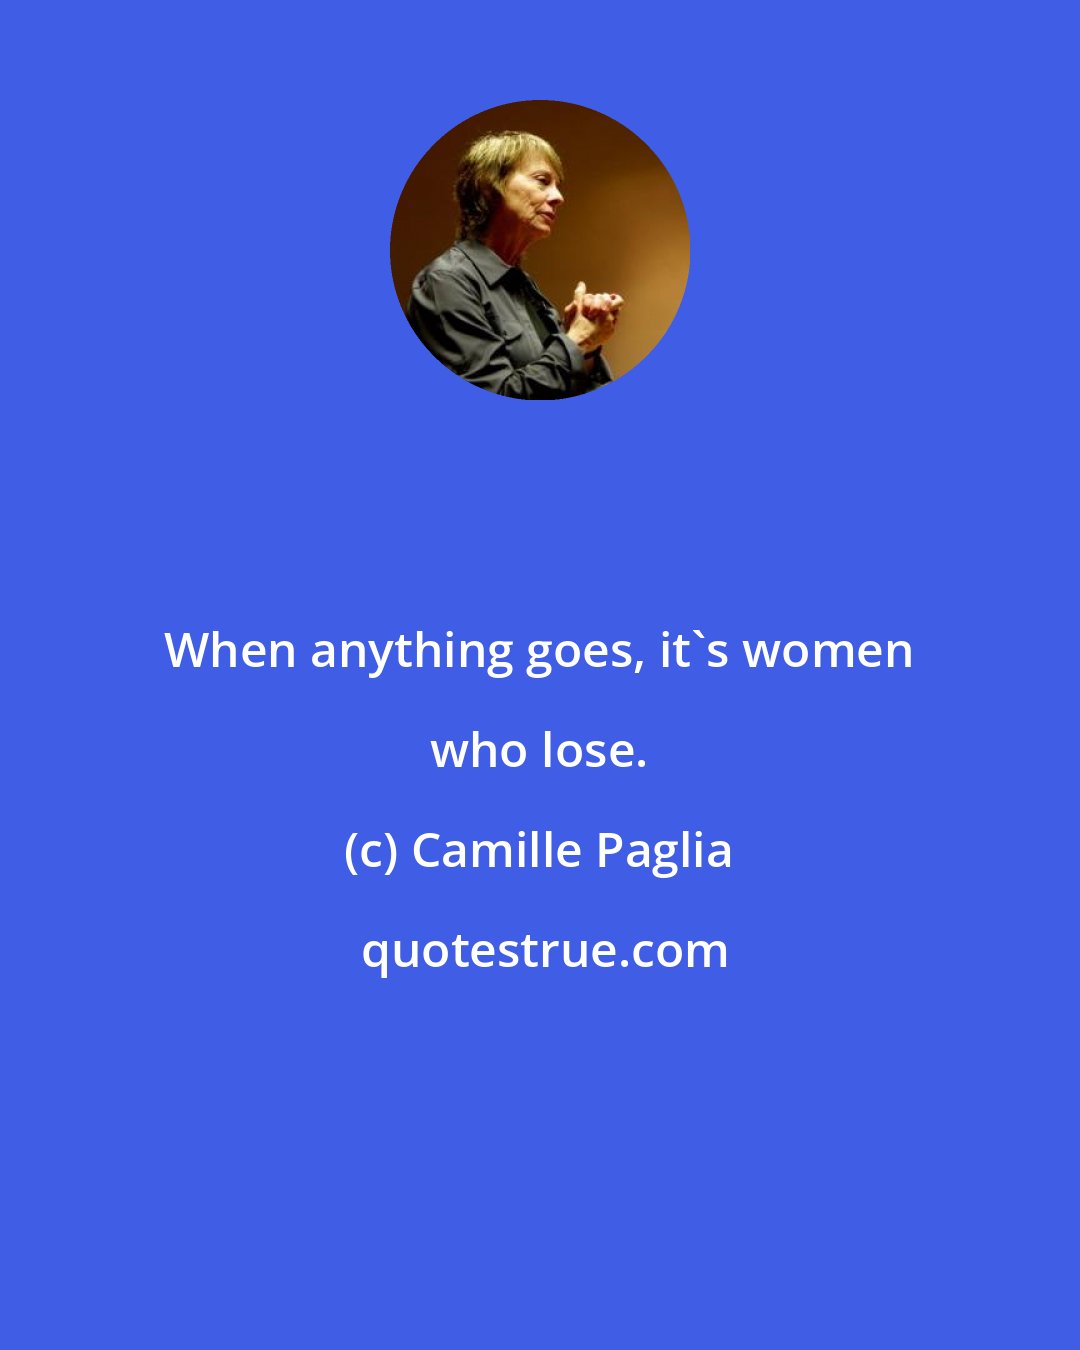 Camille Paglia: When anything goes, it's women who lose.